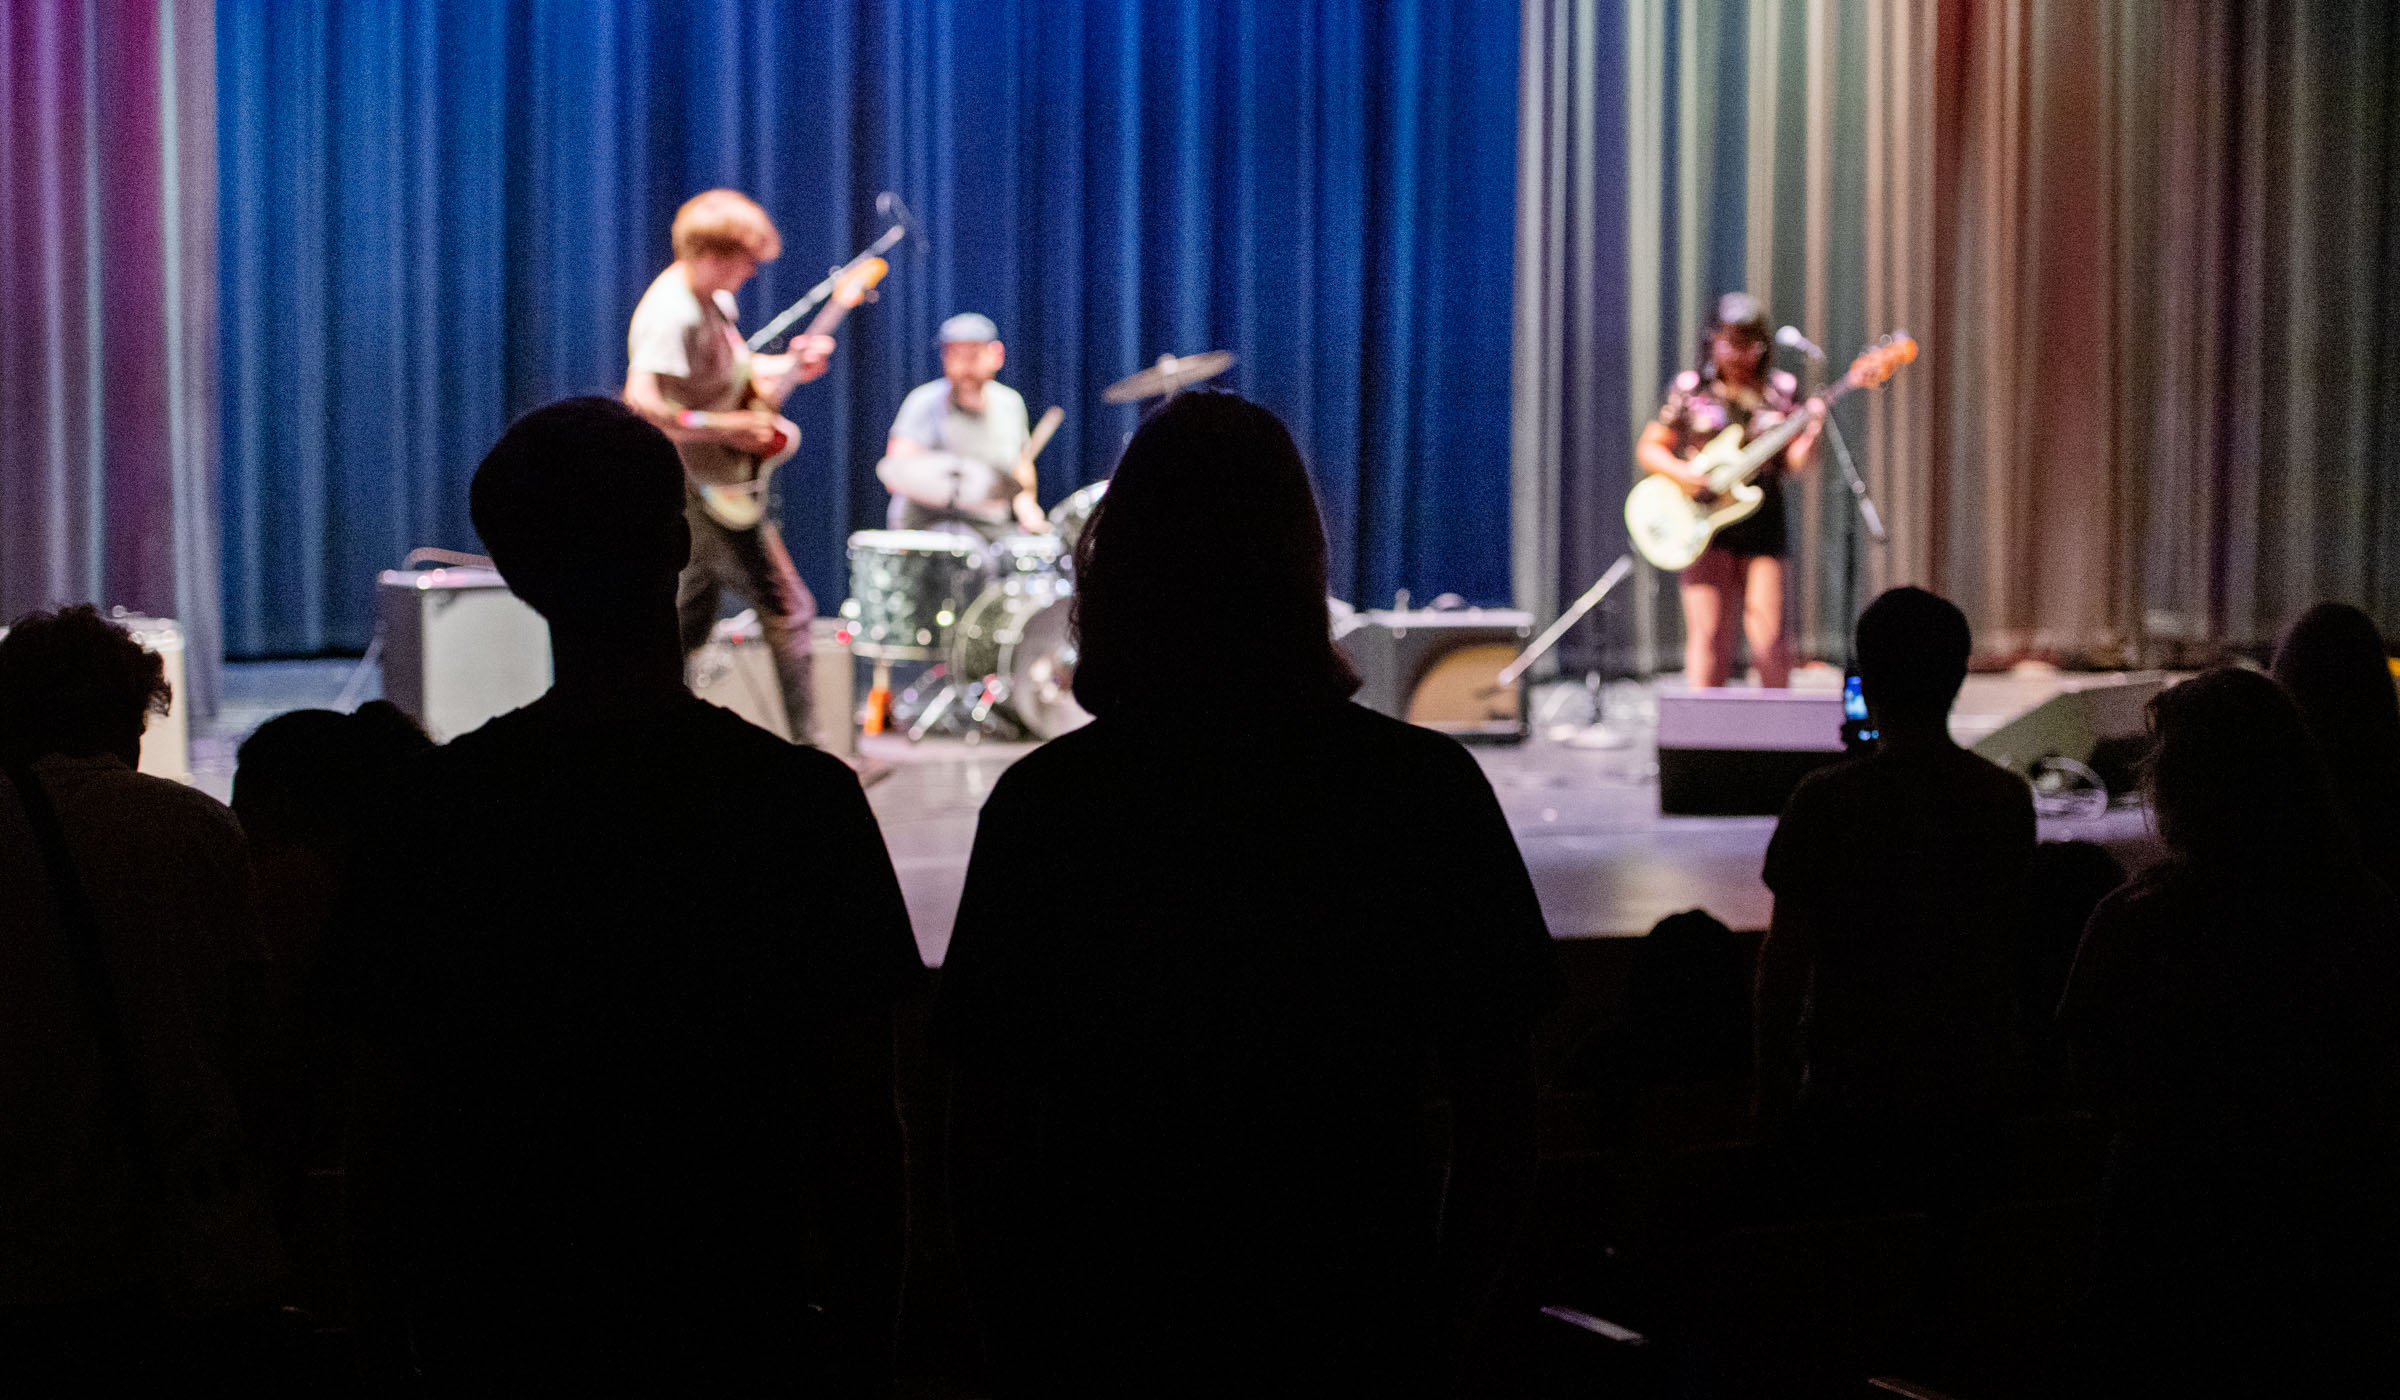 With dark sillouettes of concert goers in the foreground, a three piece rock band is lit up on the stage beyond.